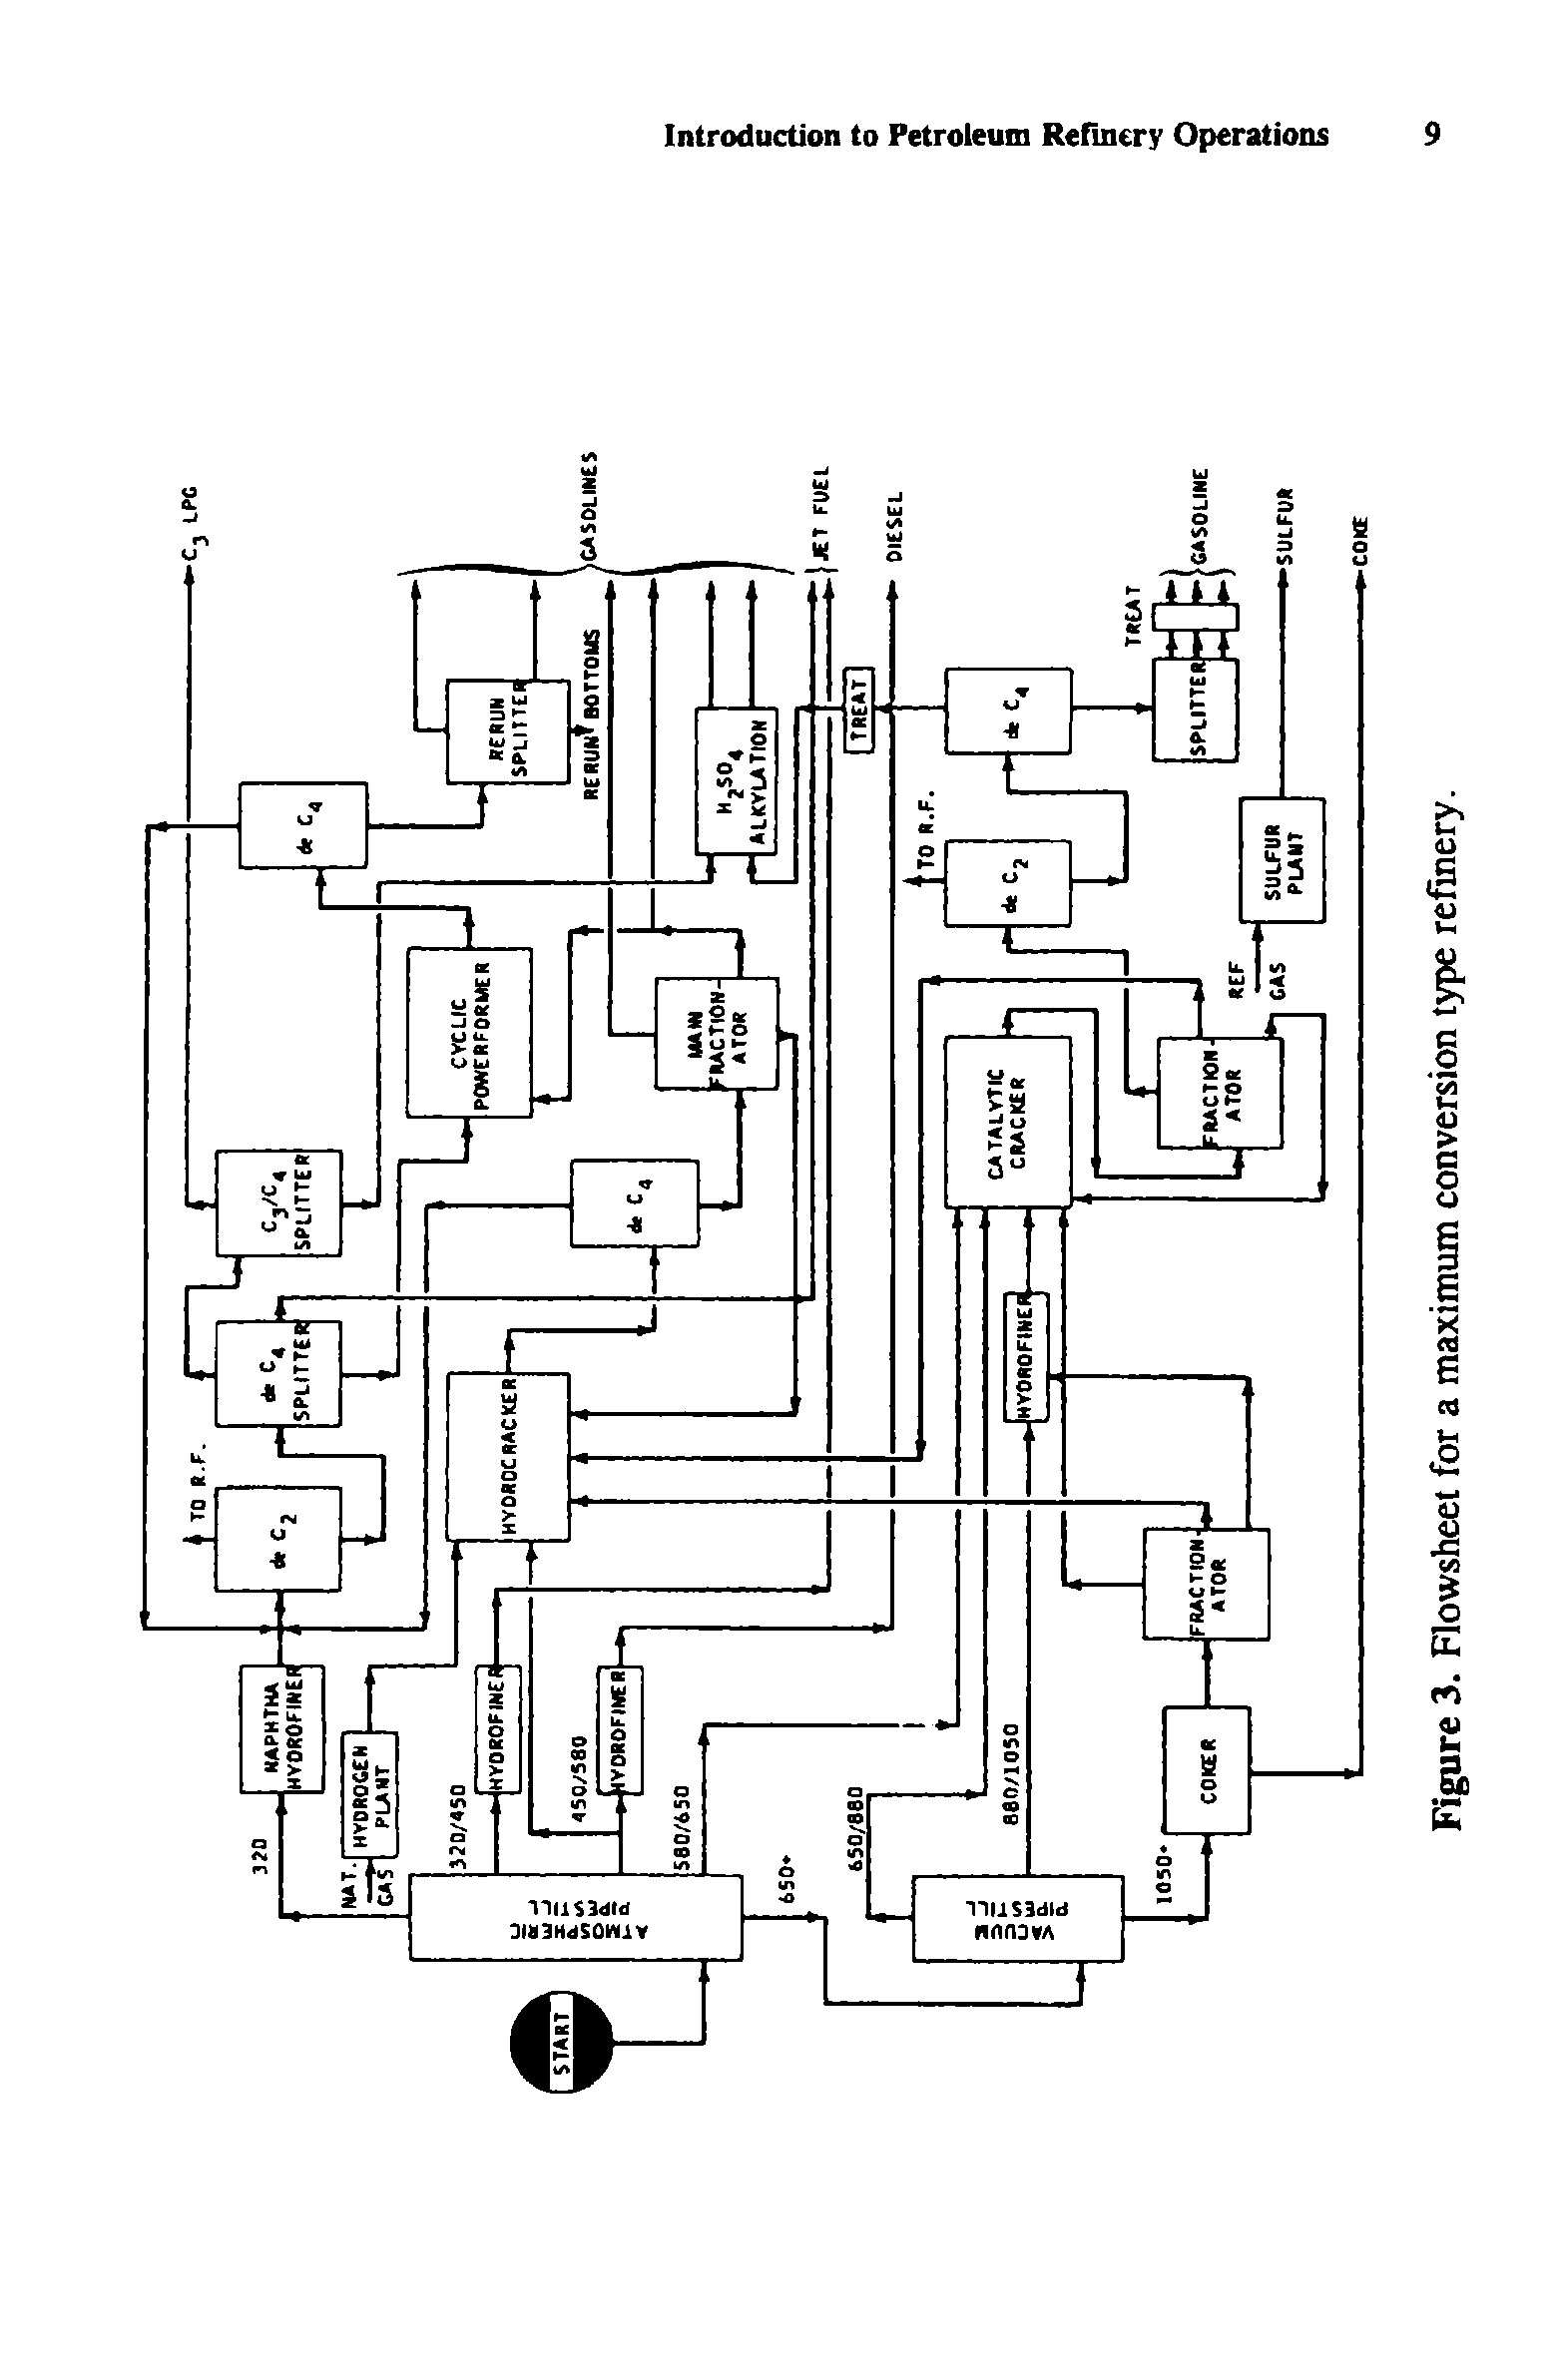 Figure 3. Flowsheet for a maximum conversion type refinery.